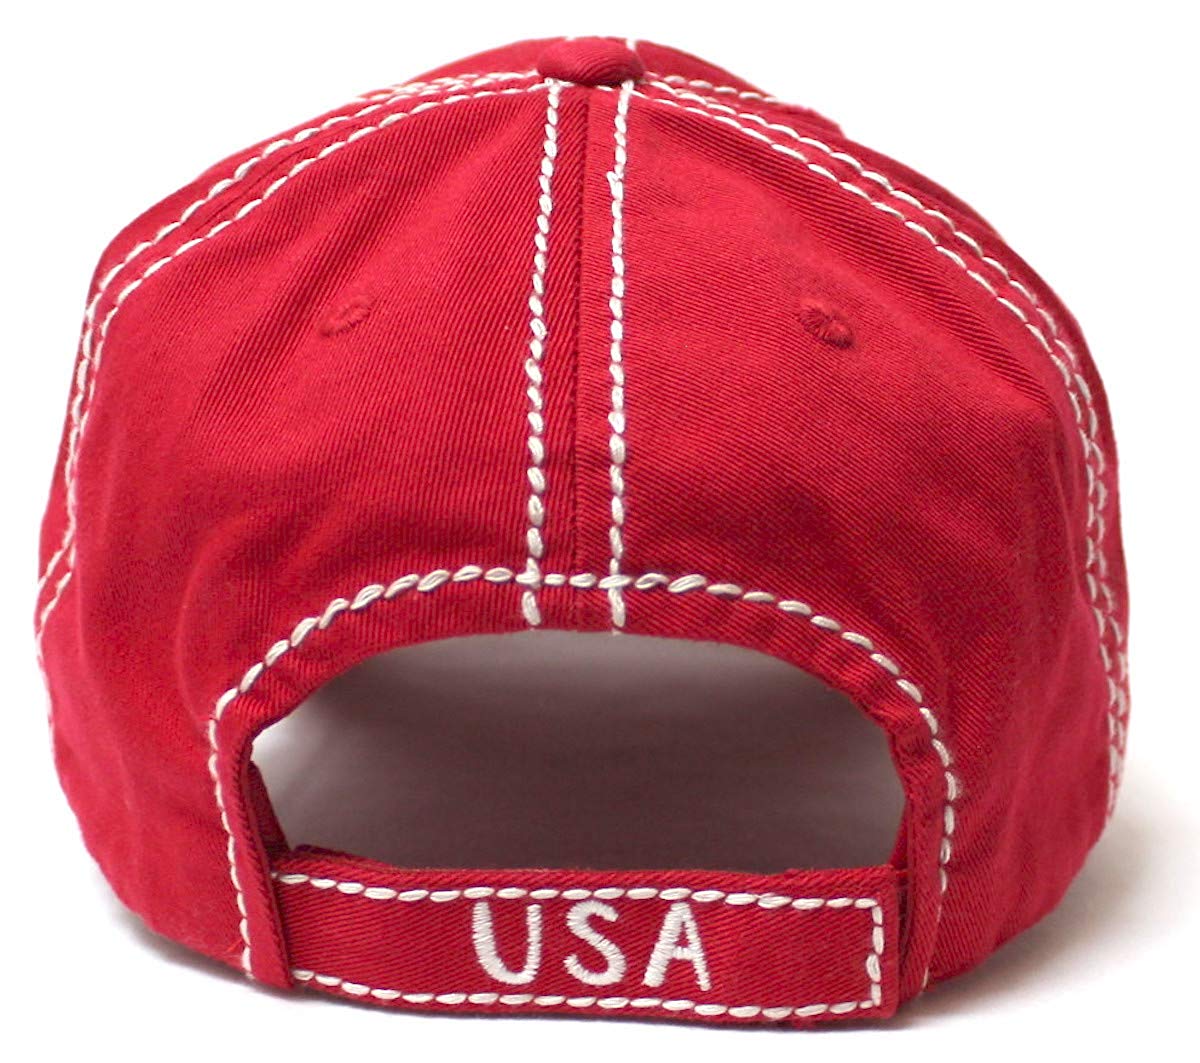 CAPS 'N VINTAGE July 4 Celebratory USA Flag Patch God Bless America Embroidery Ballcap, Ruby Red - Caps 'N Vintage 